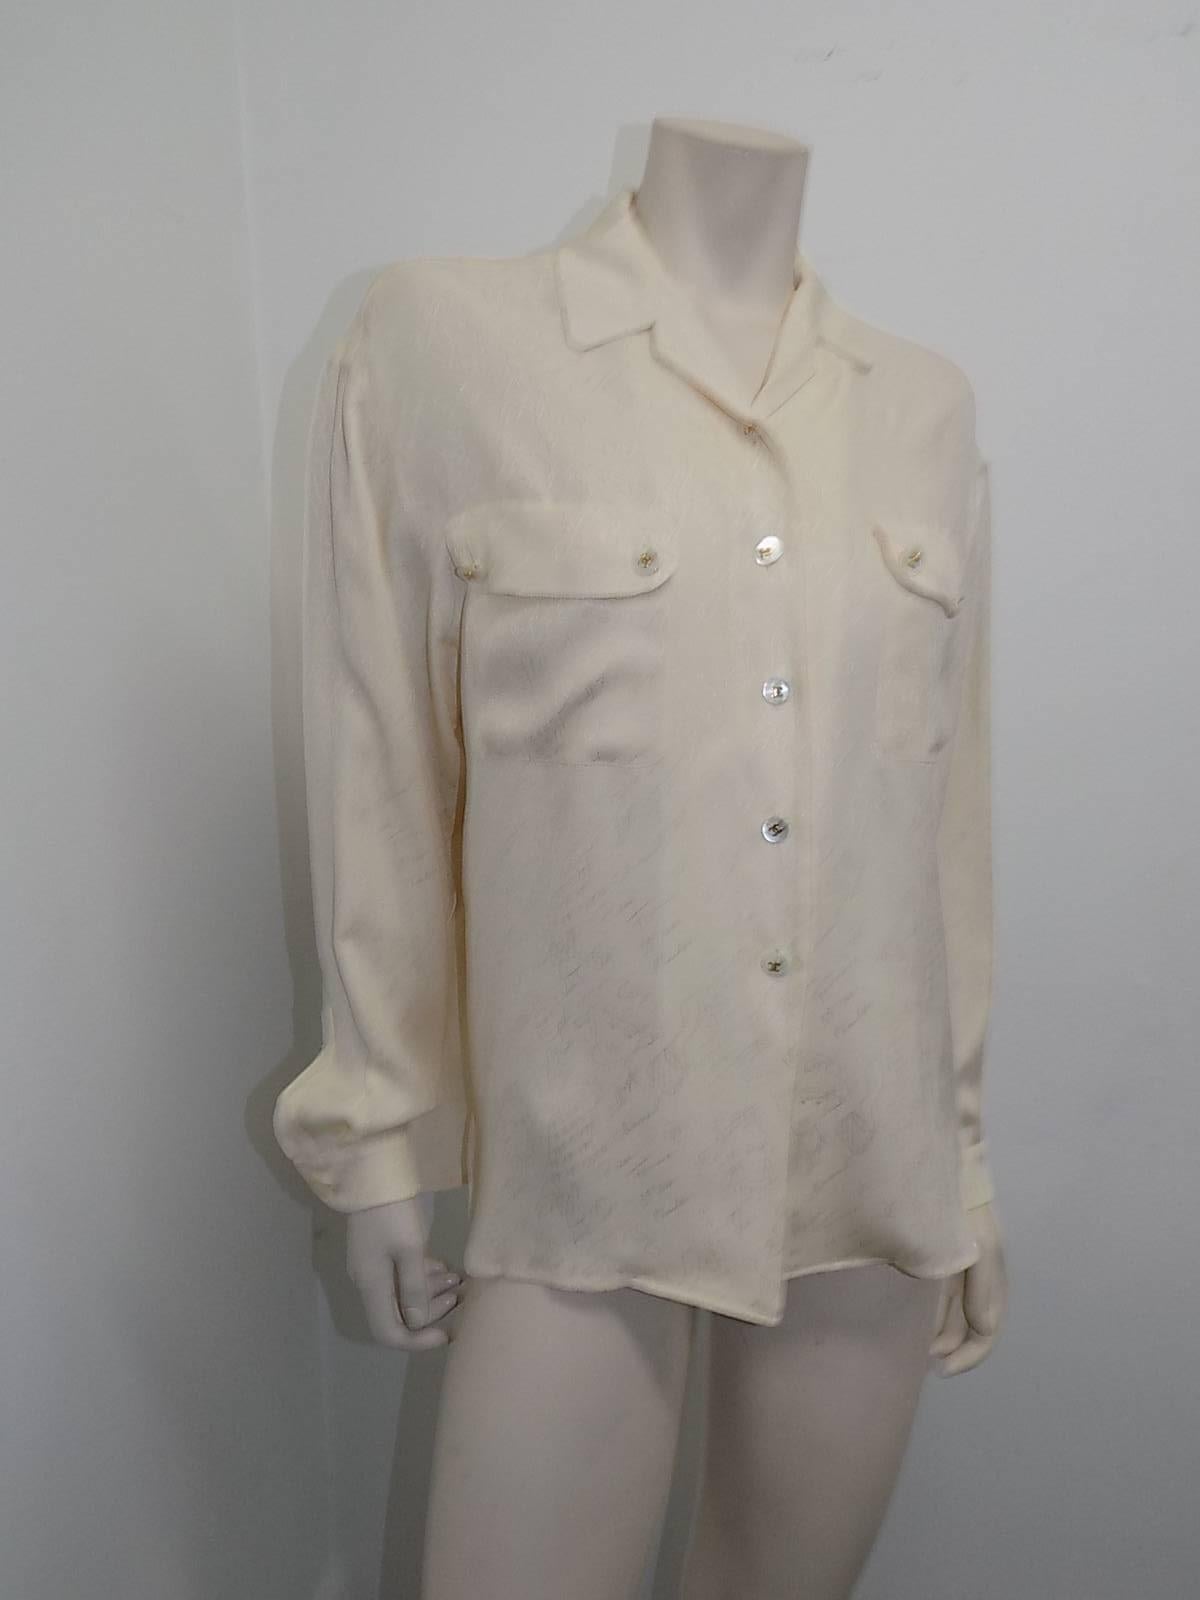 Incredible Chanel Rare Vintage cream silk Jacquard  blouse shirt. Featuring  MOP buttons with gold tone CC logo, two patch pockets with flap and buttons, collar , cuffed sleeves and most important amazing Coco Chanel motif  Jacquard  print. From her